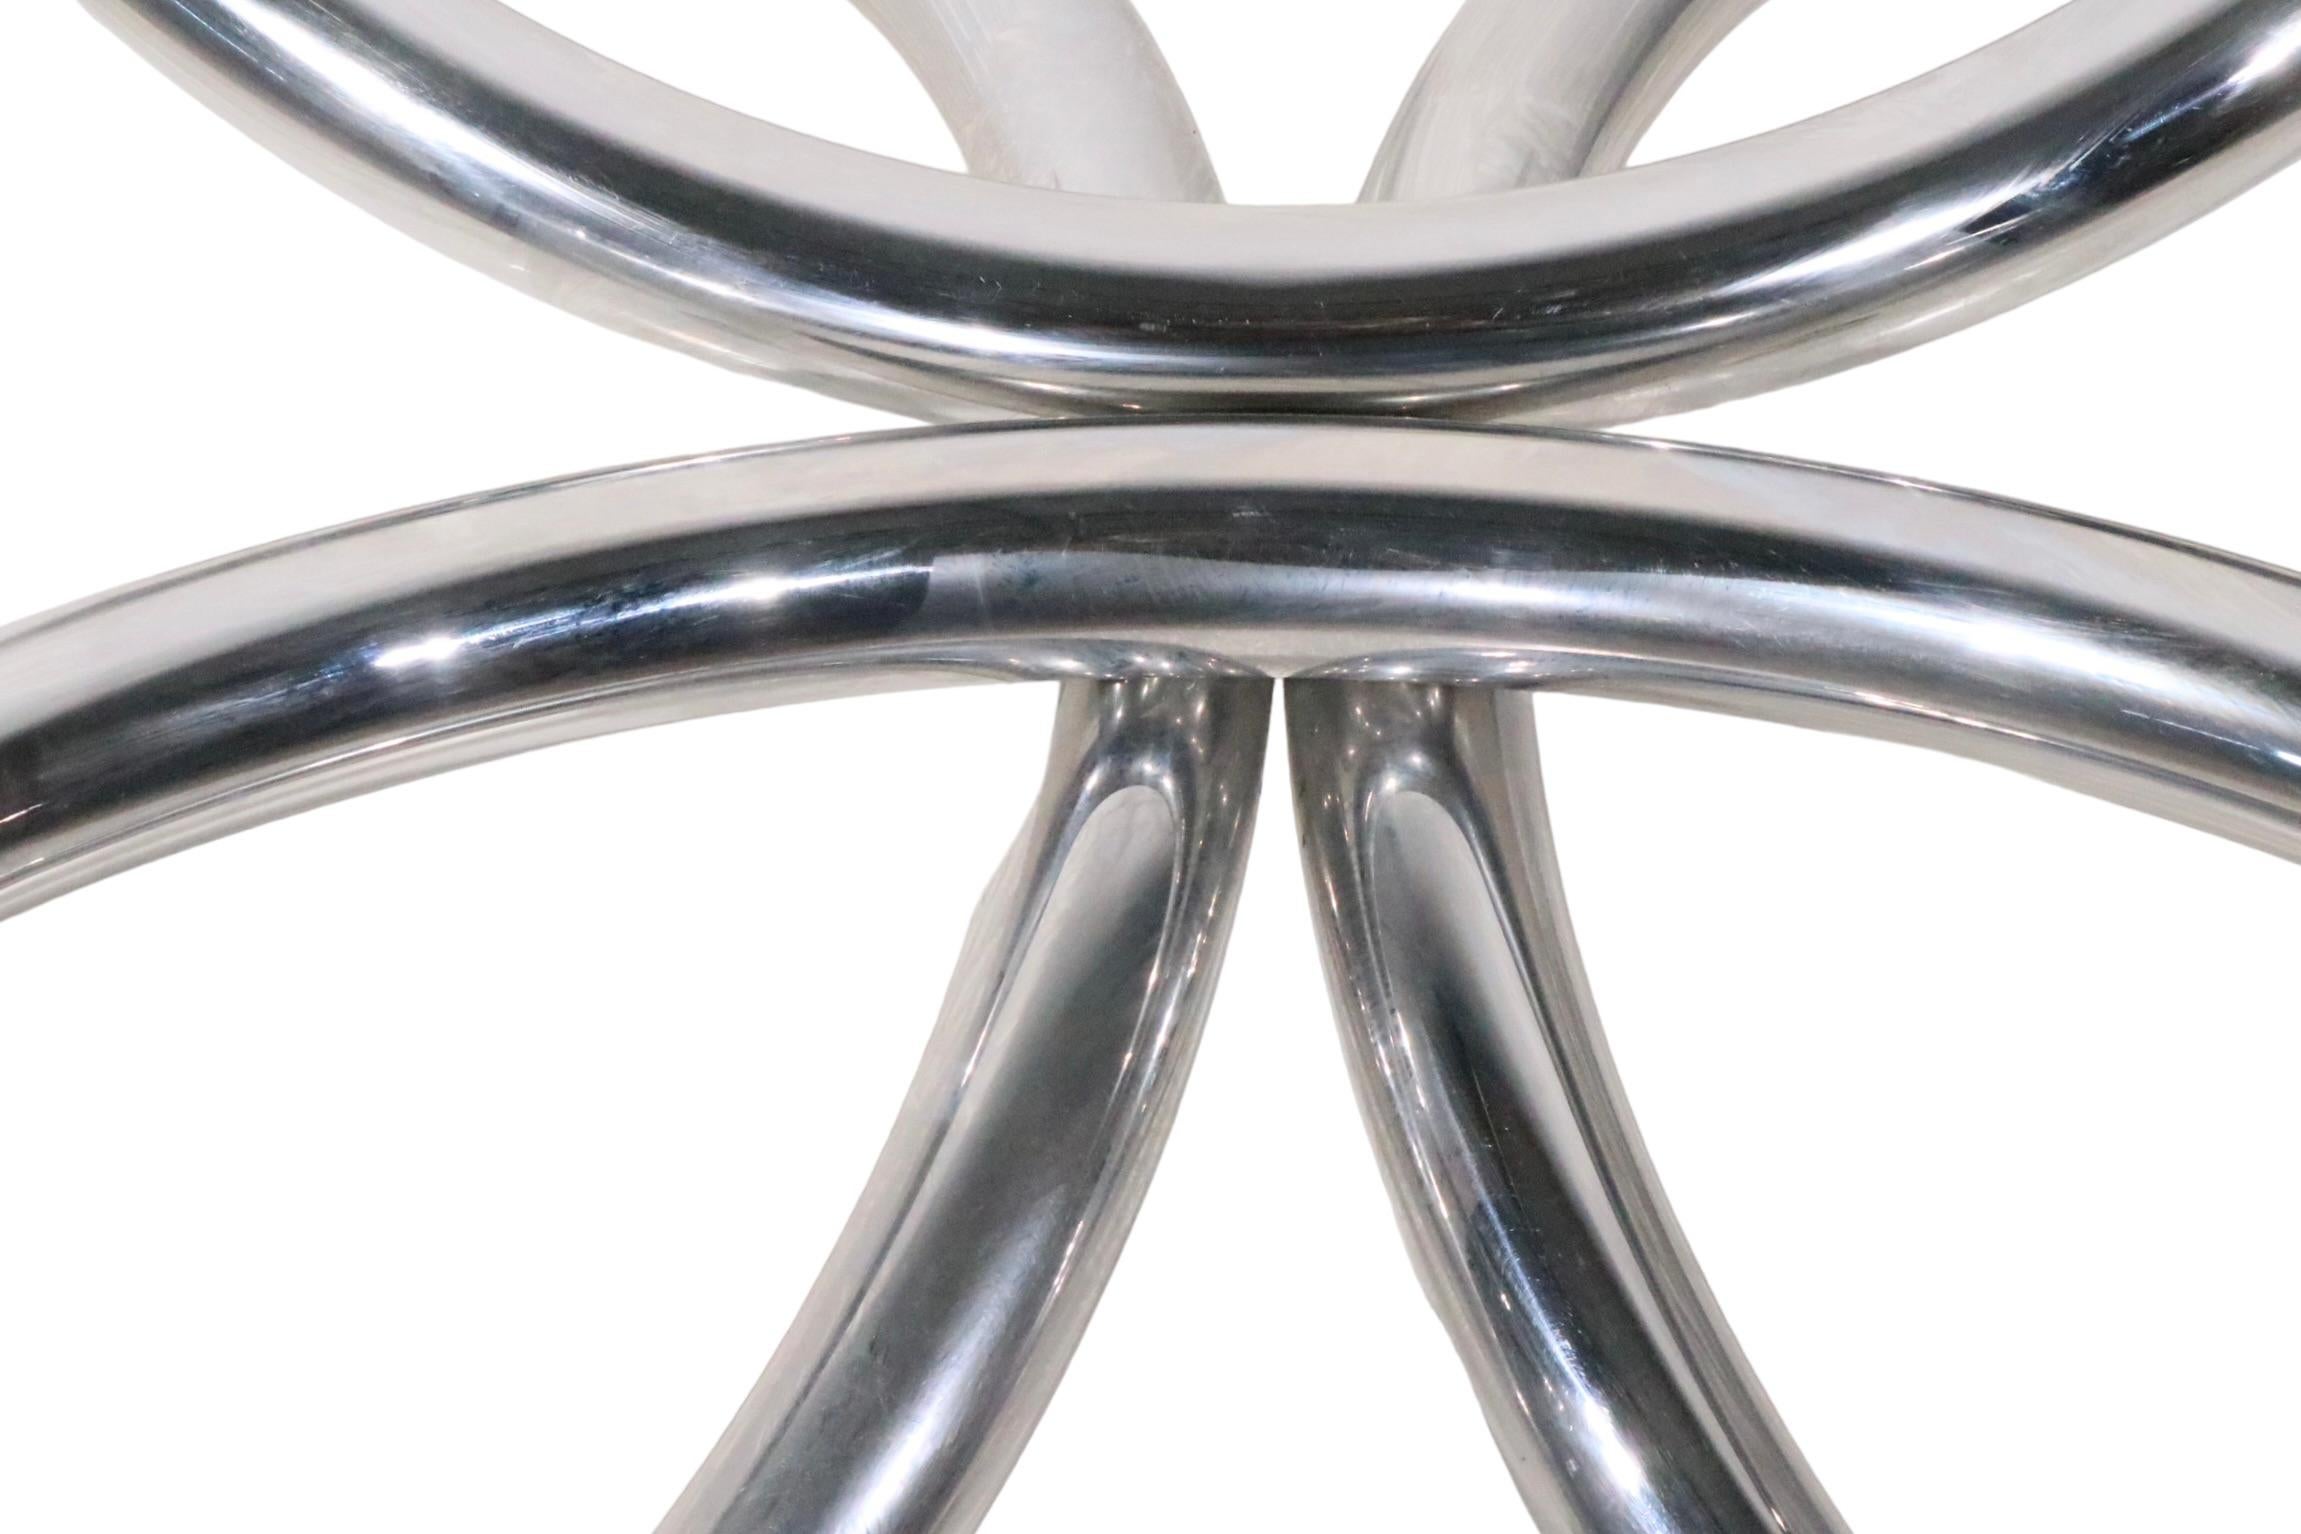  Round Chrome and Glass Coffee Cocktail Table c 1960/70s possibly Paul Tuttle  For Sale 1